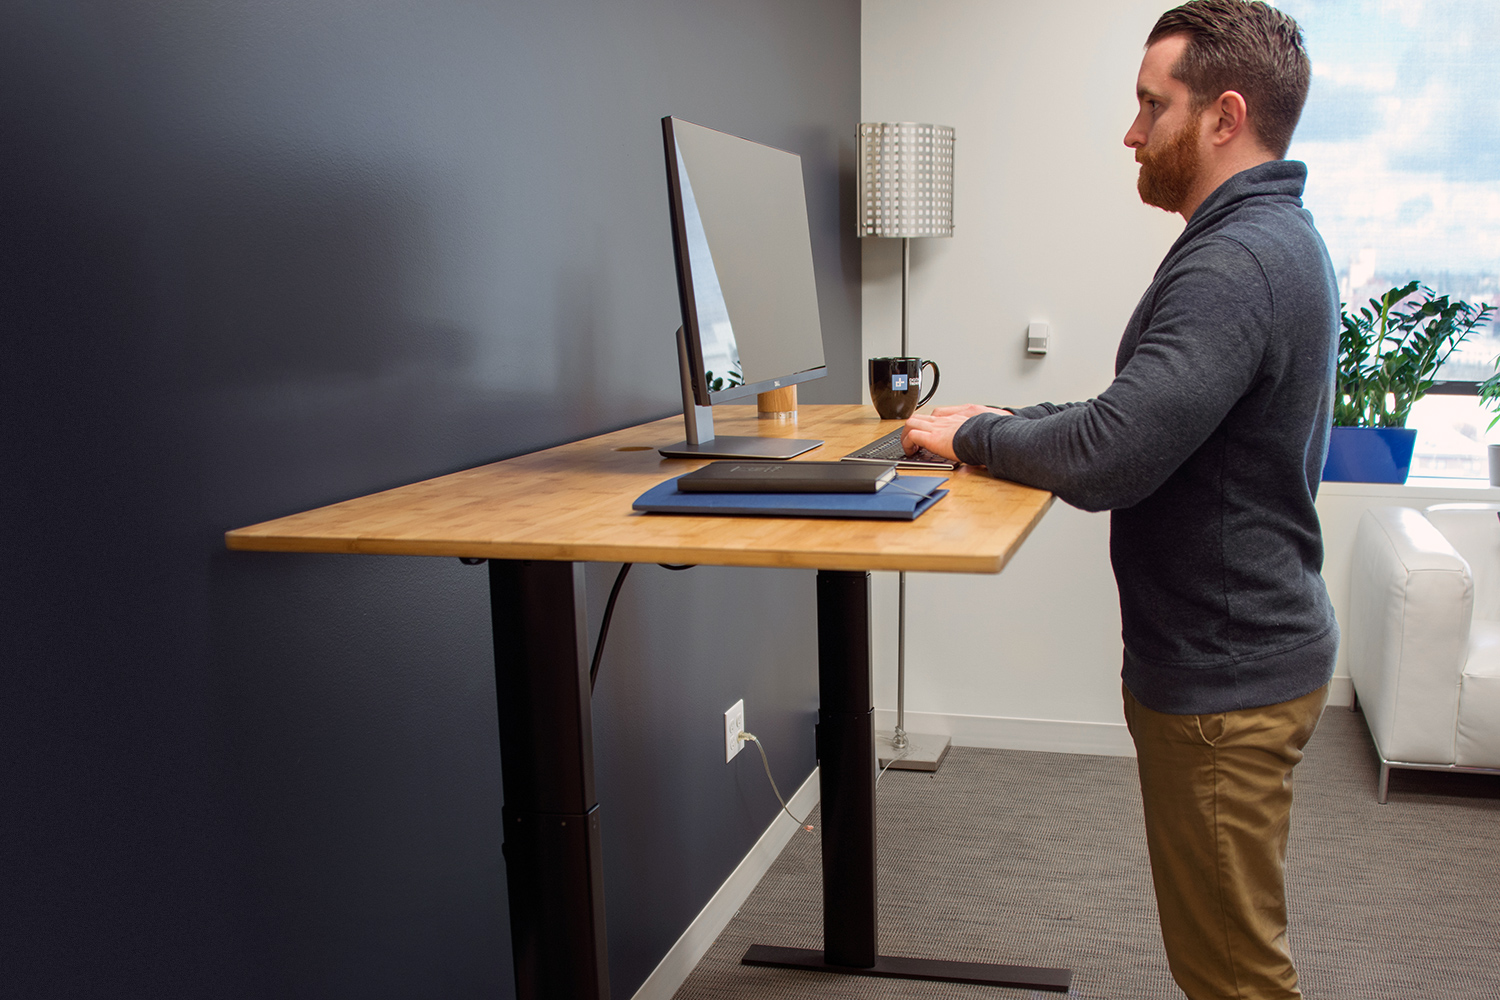 Corsair's first standing desk is designed for gaming, streaming